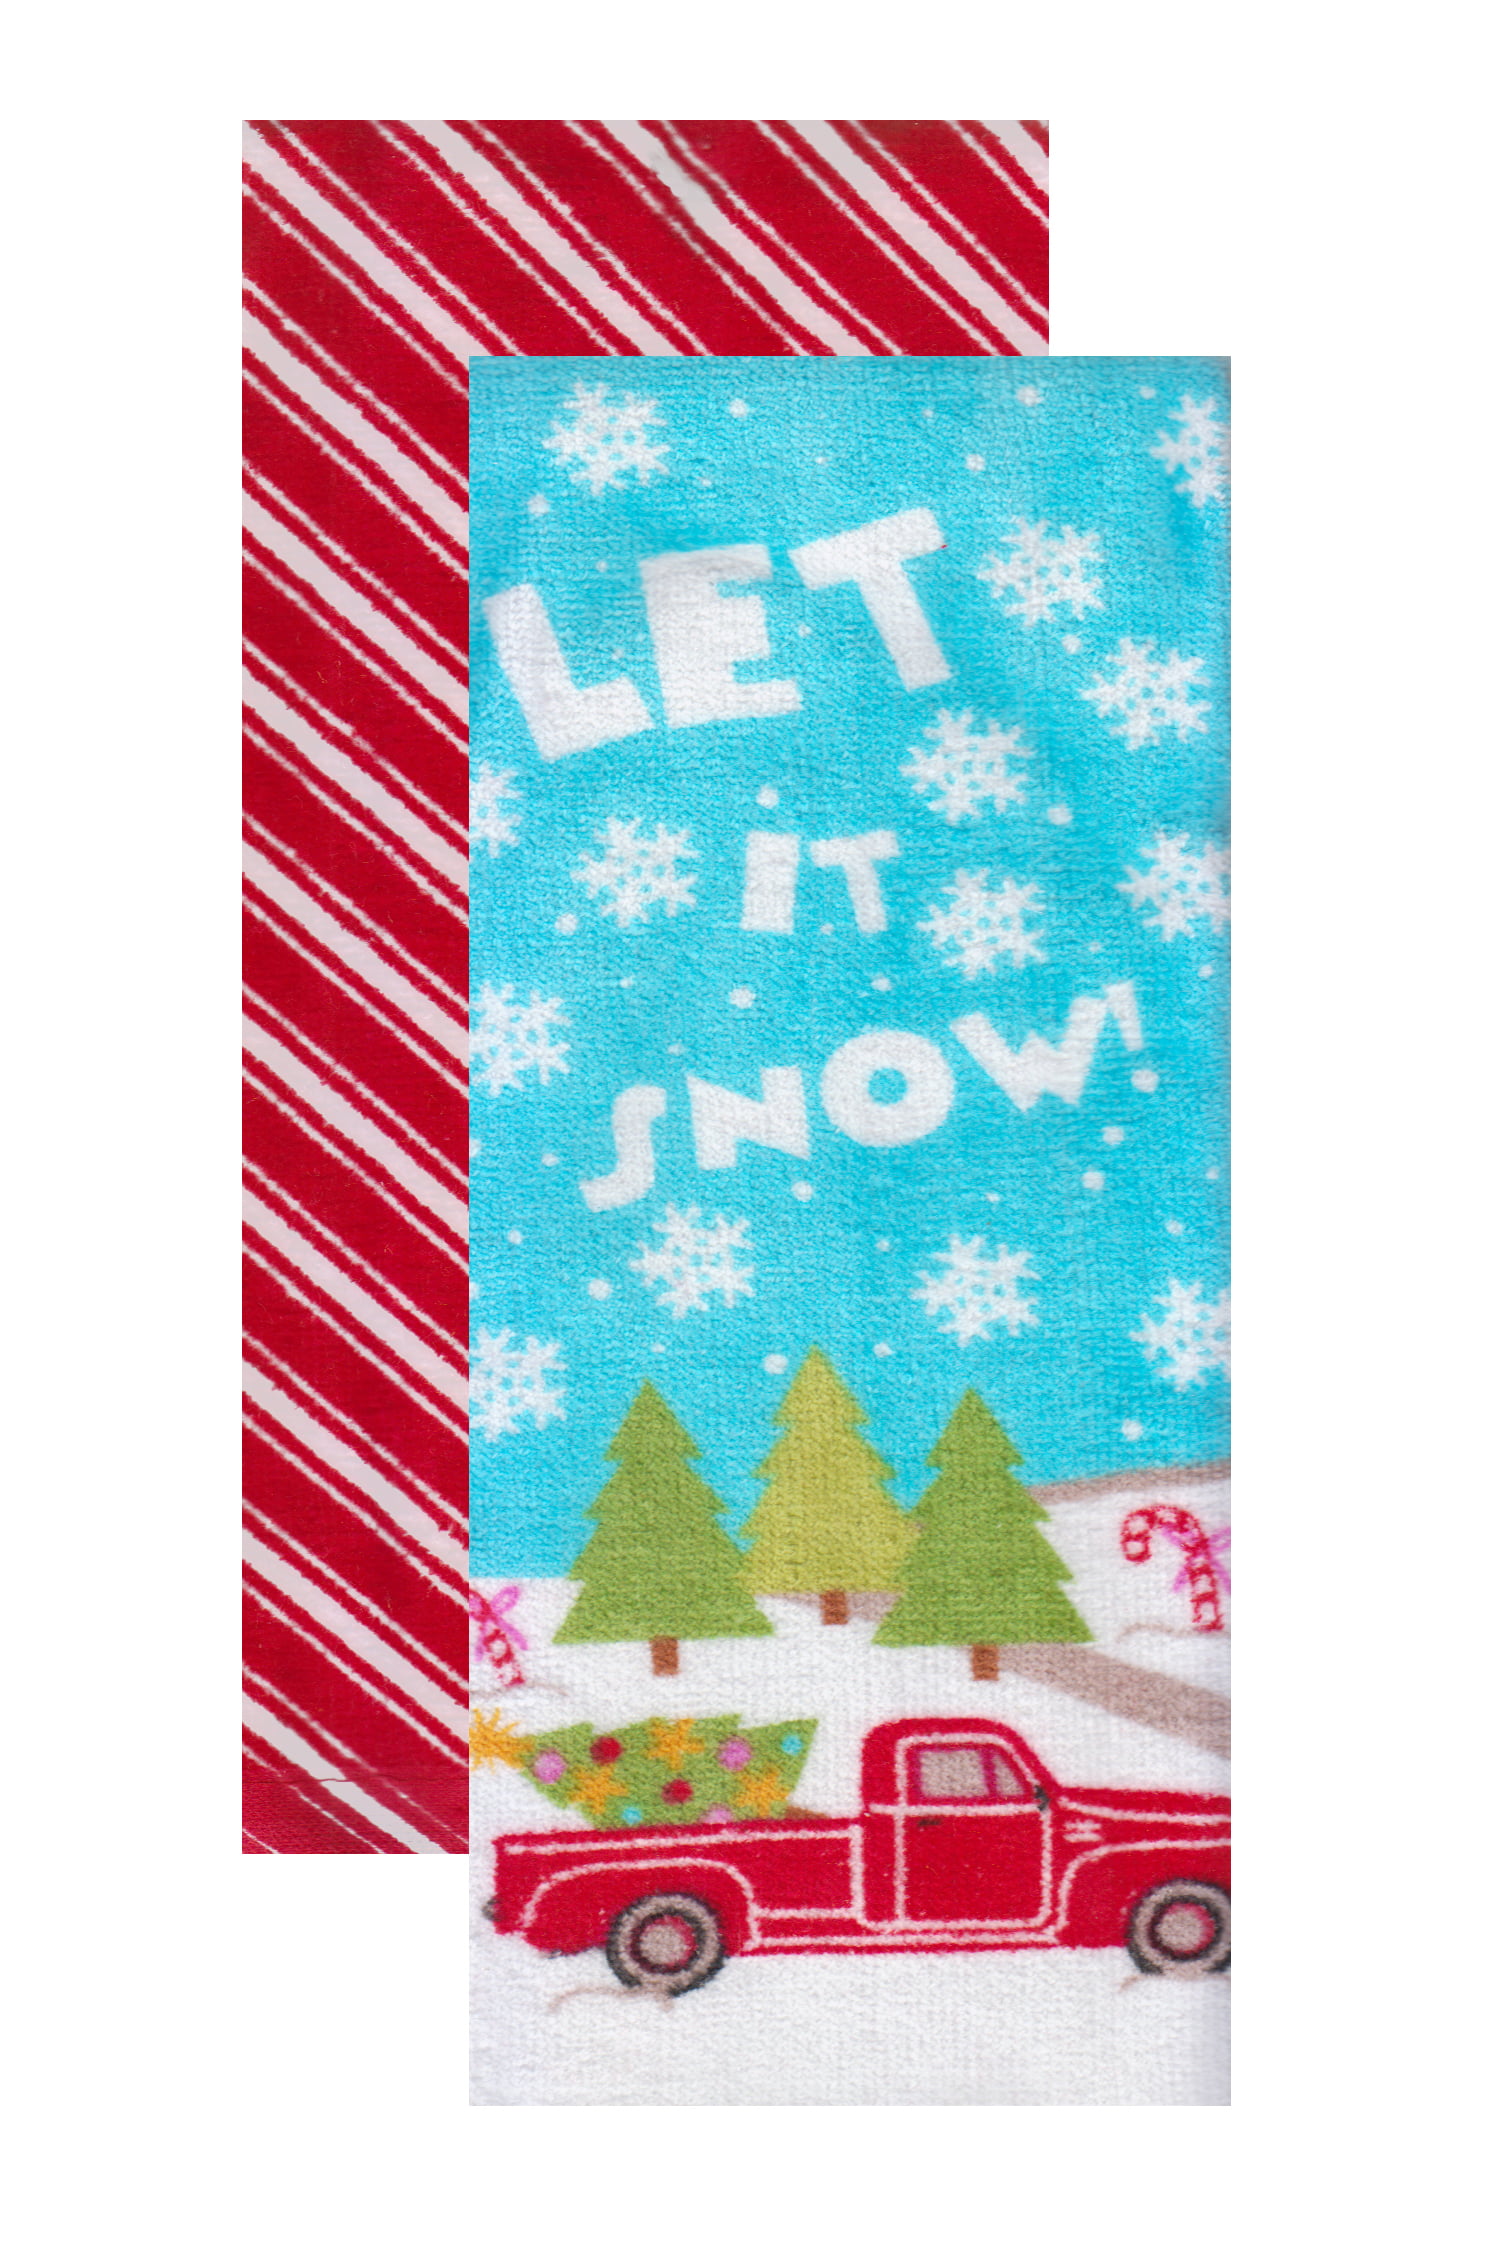 Decorative Towel Santa Kitchen Towels Set/2 Cotton Snowy Print 102425, Size: 28 in H x 28 in W x .25 in D, Red